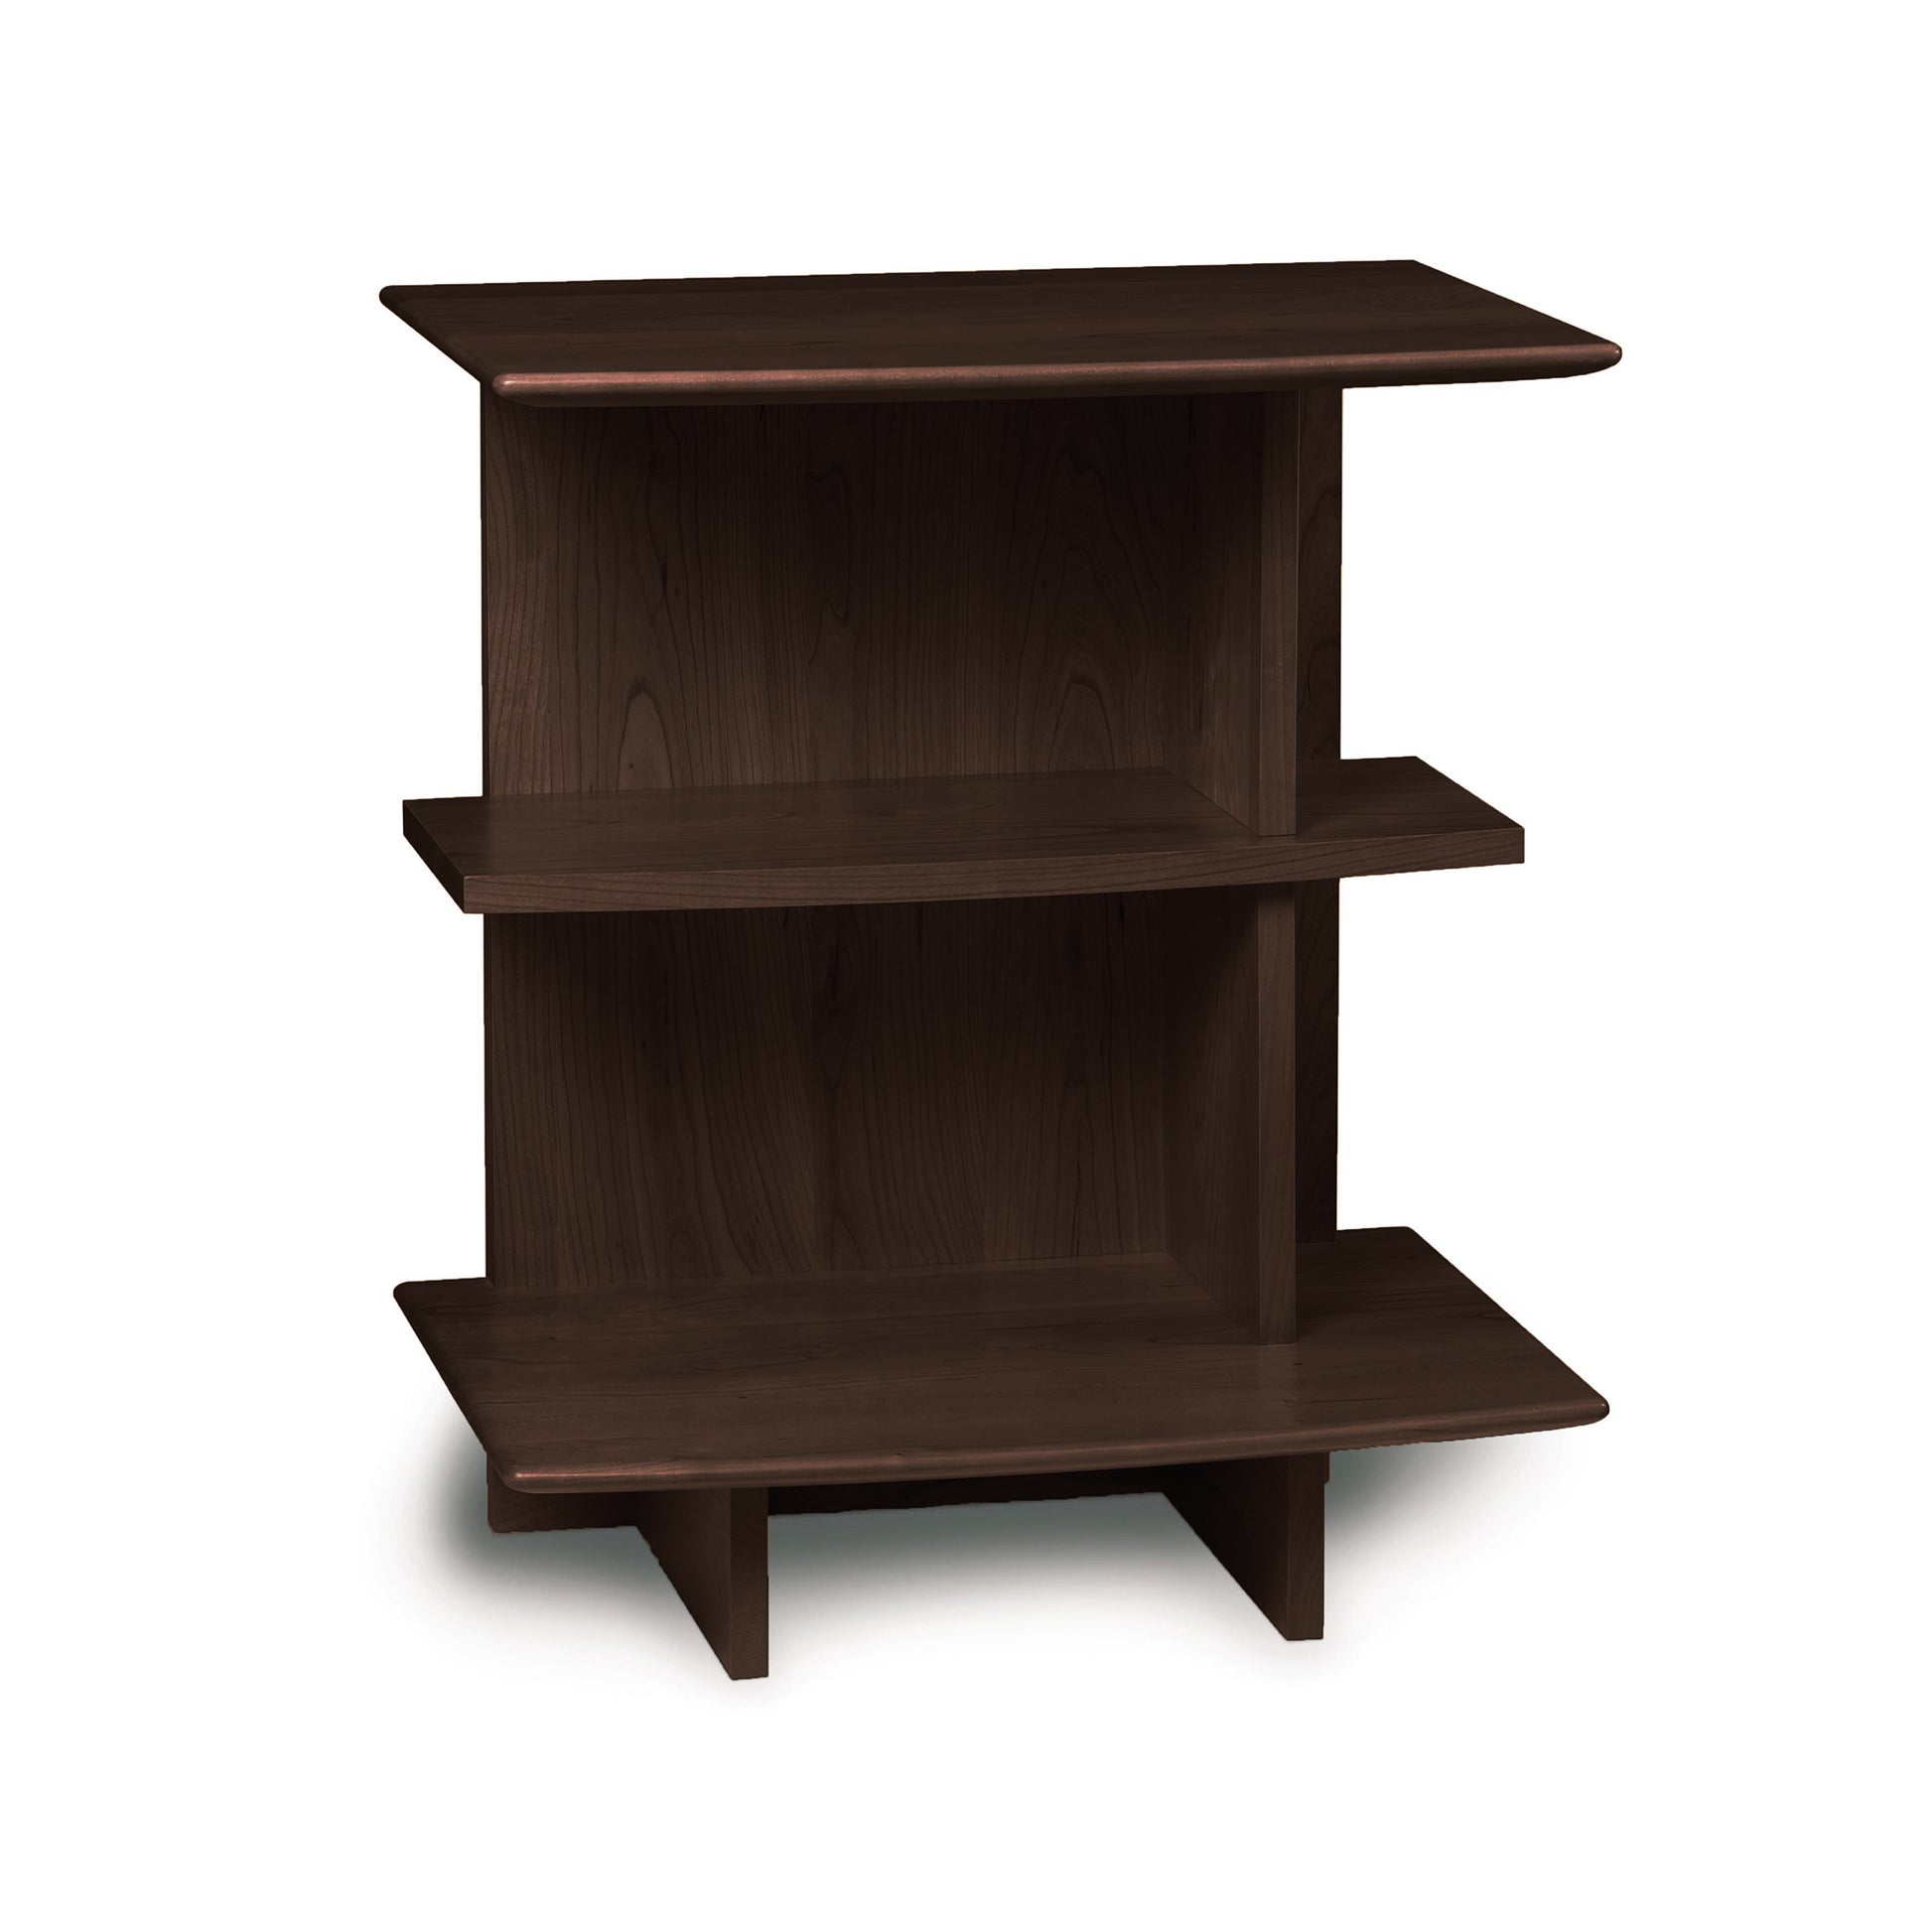 A Sarah Open Shelf Nightstand from the Copeland Furniture Collection with three tiers on a white background.